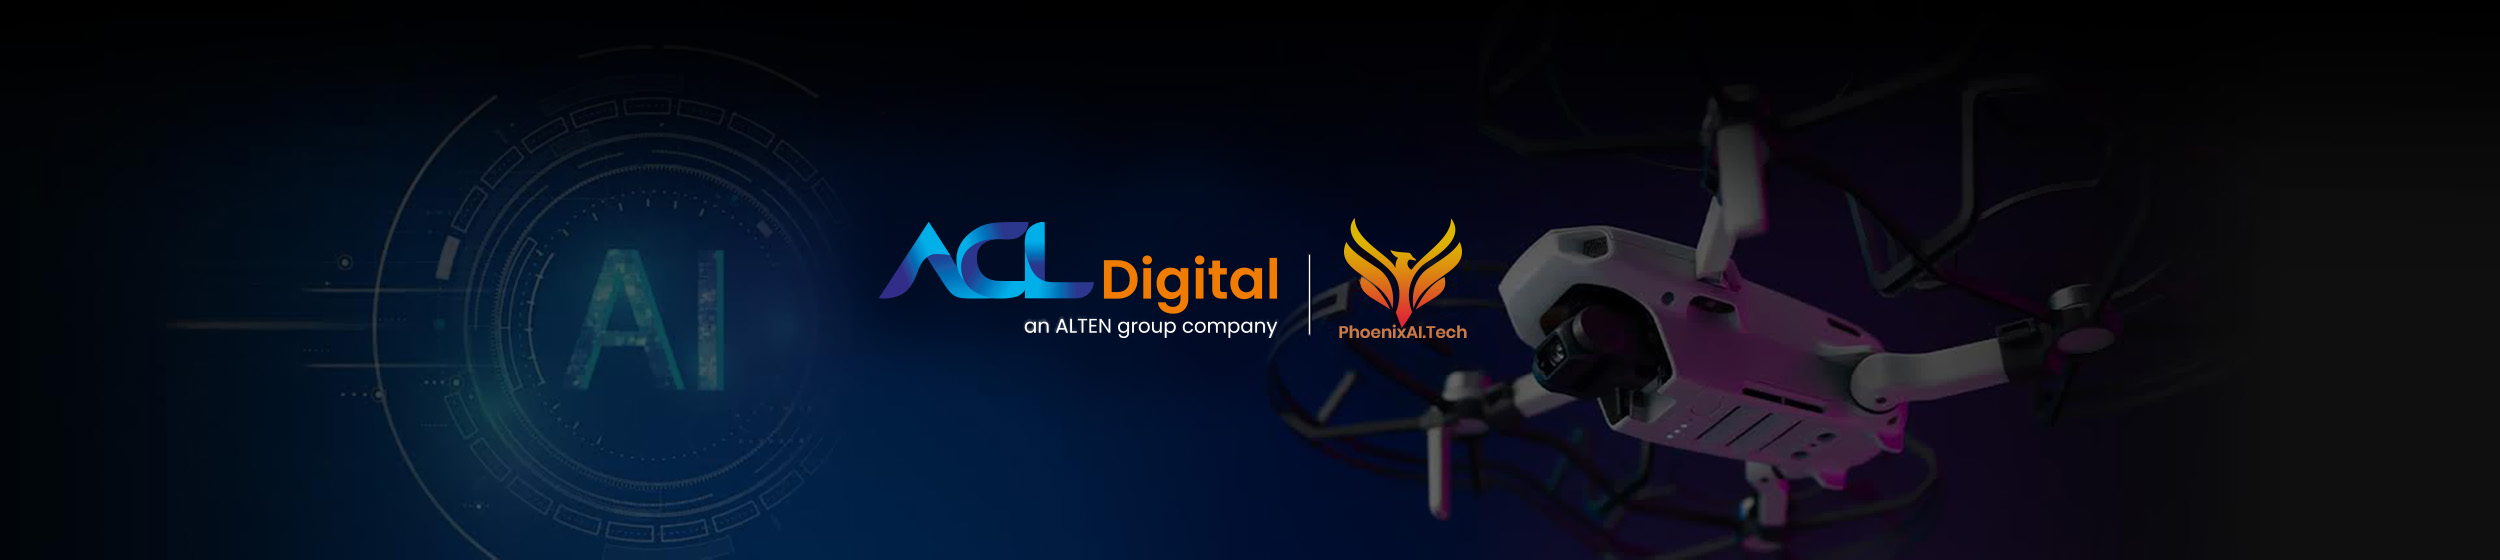 Banner-ACL Digital and PhoenixAI.tech Partner to Take AI-Driven Drone Technology to New Heights